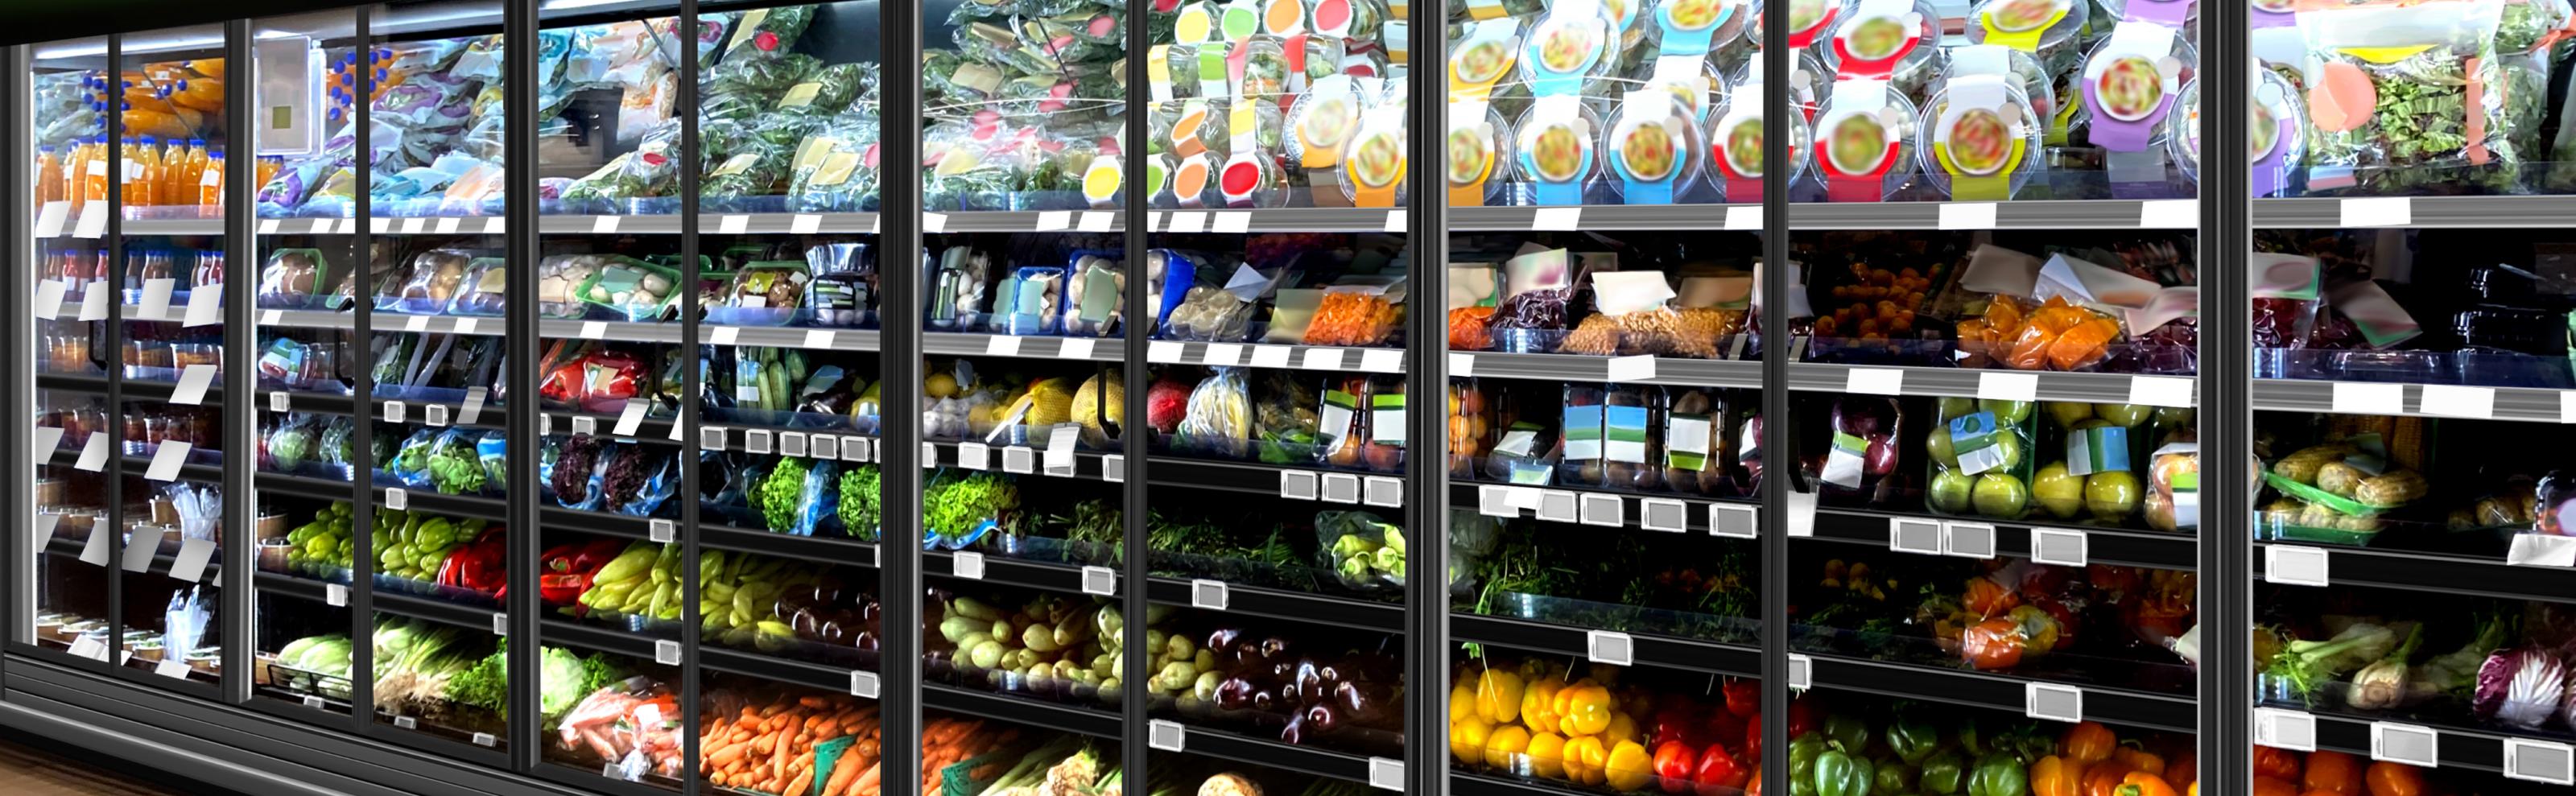 Commercial refrigeration image